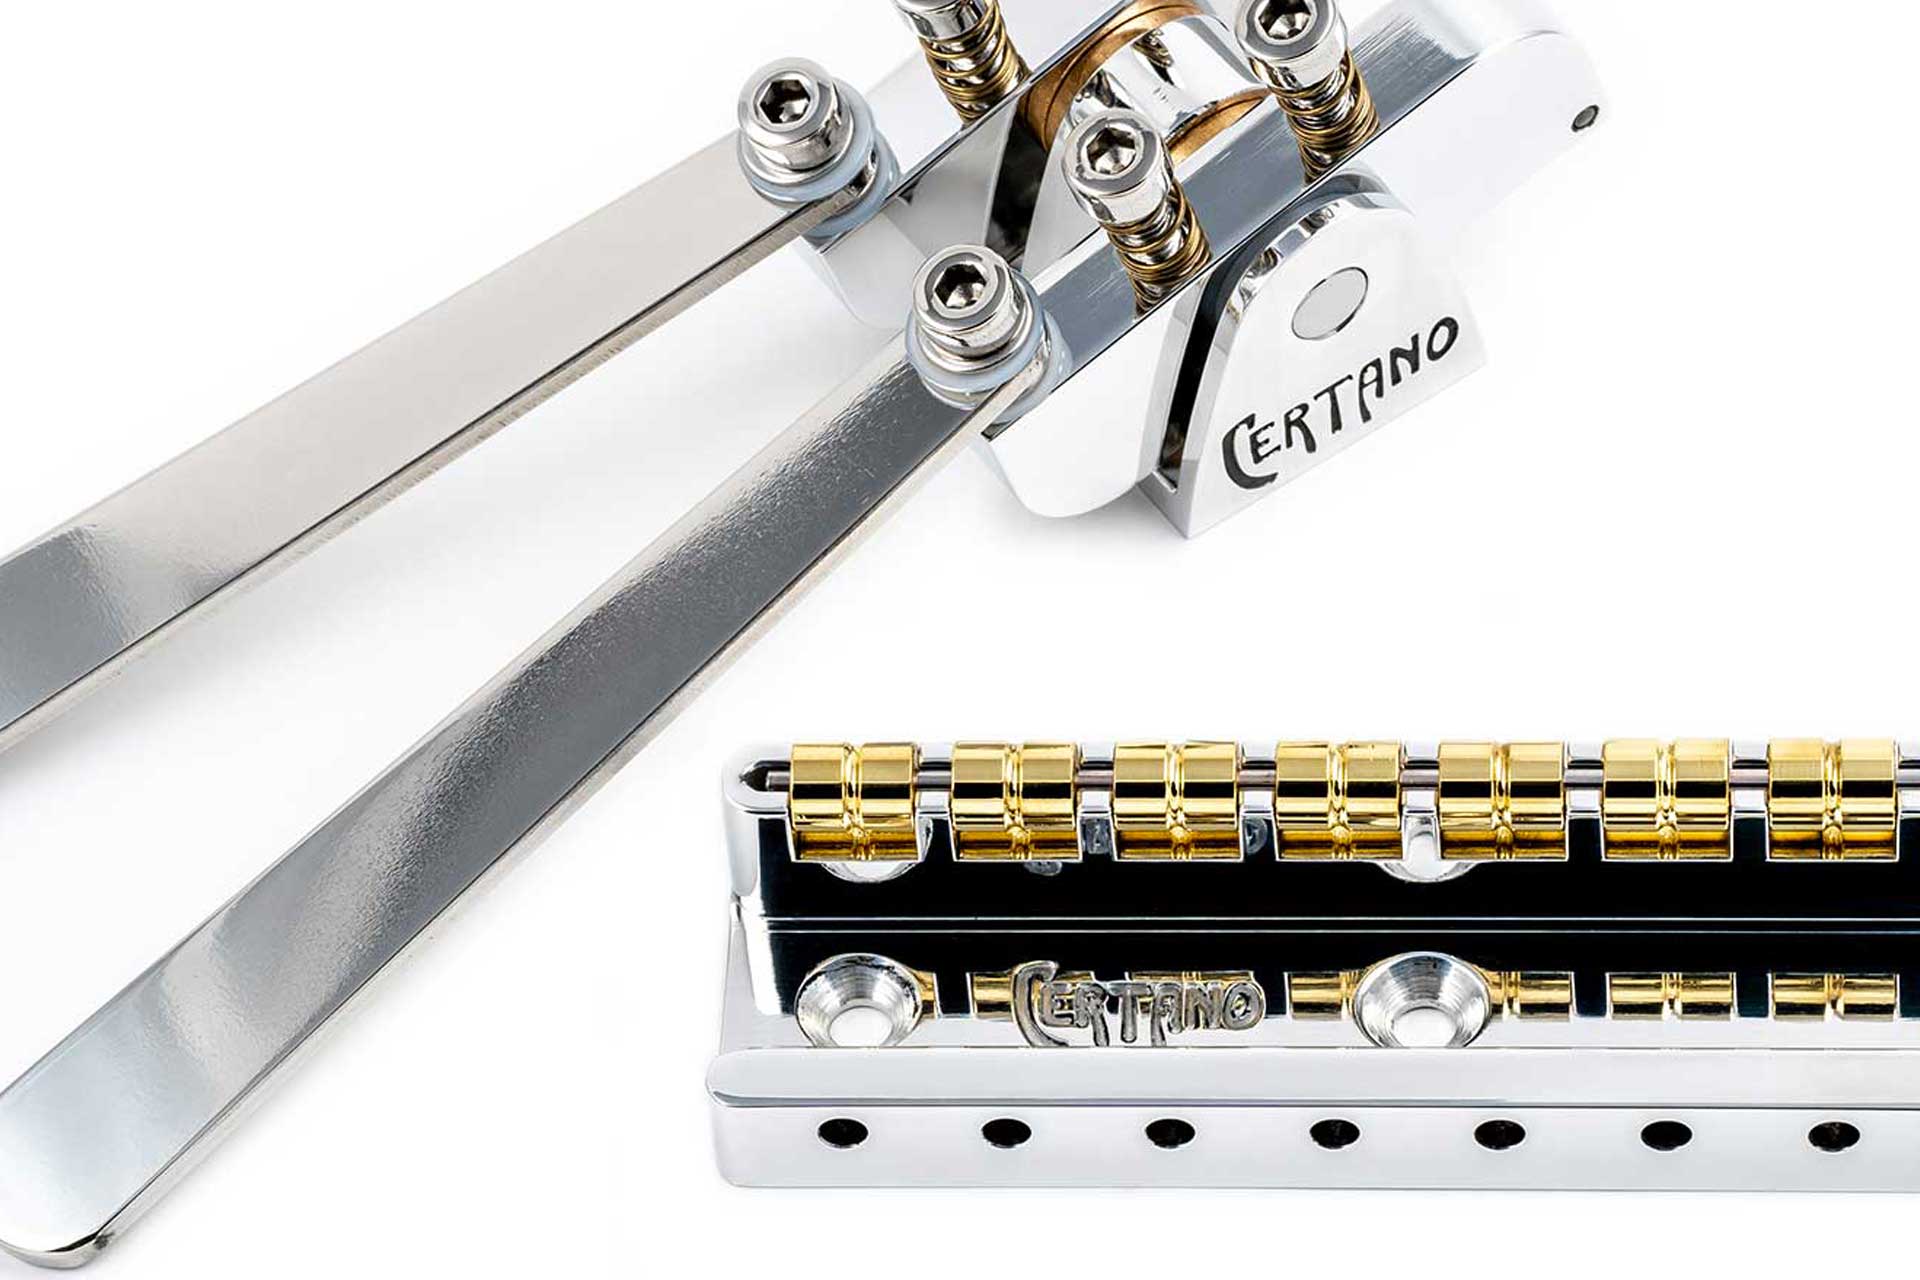 Certano-Combo-Palm-Bender-Bridge-r-r-b-3-with-the-bender-le-carre-Regular-for-lap-steel-white-background-zoom-1